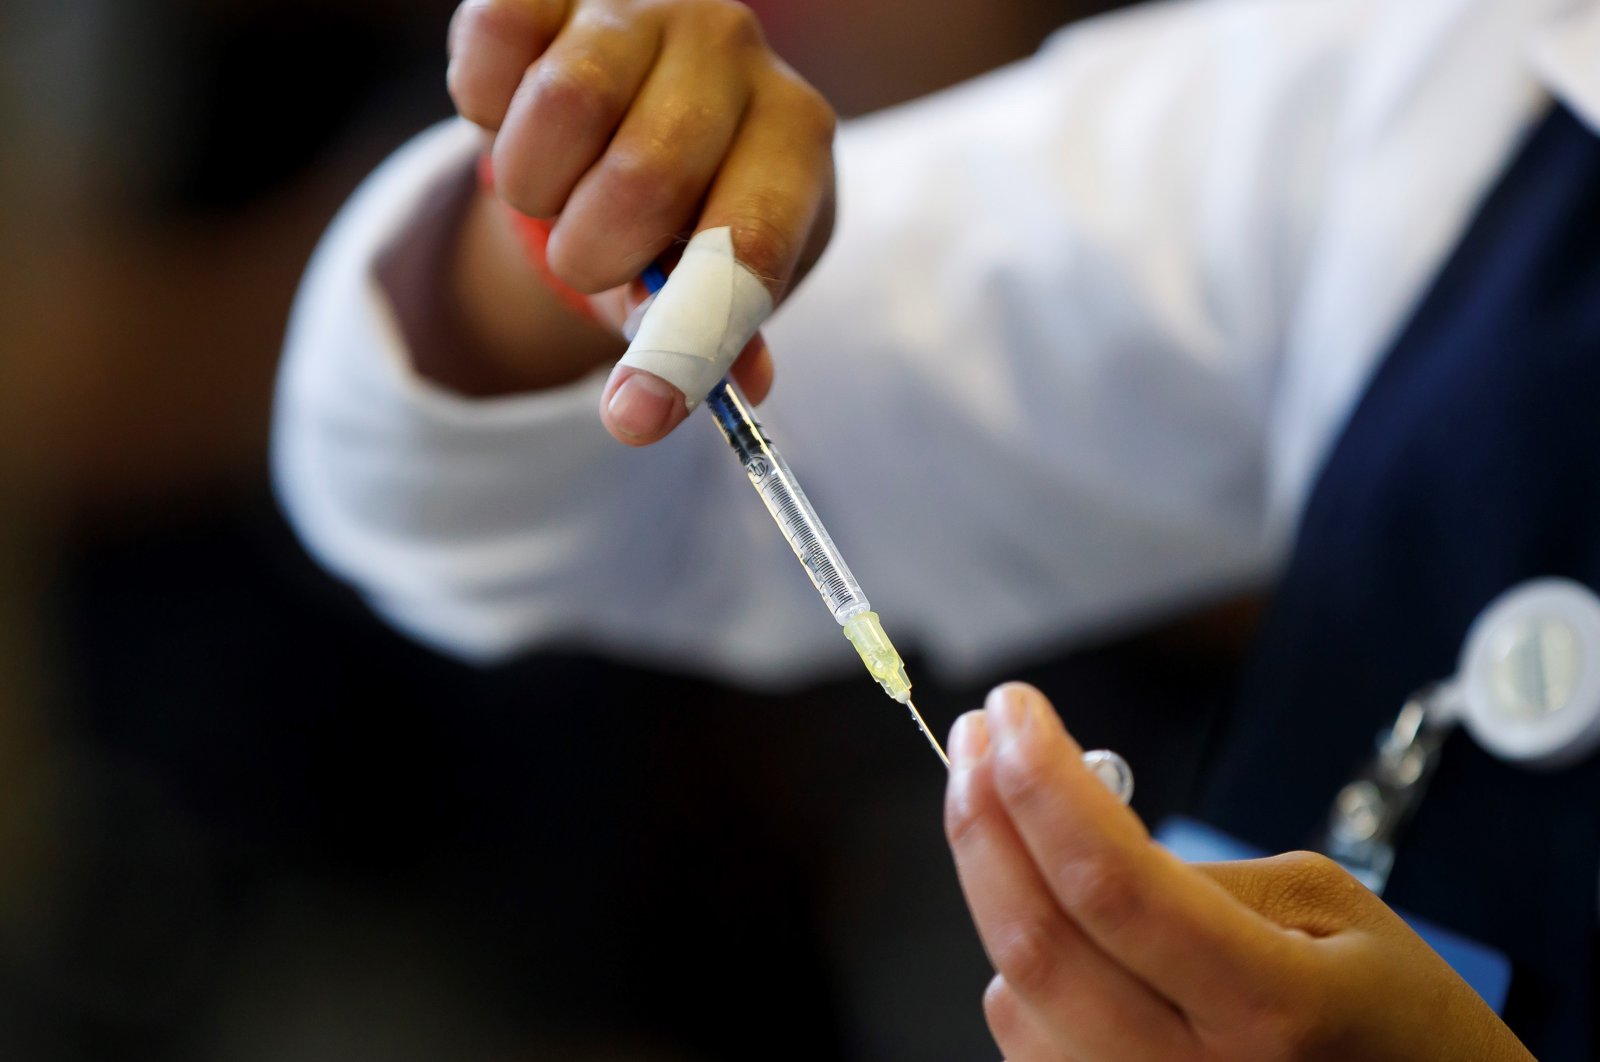 Health personnel prepares doses against COVID-19 in a vaccination center that includes, among others, the Russian Sputnik V vaccine, in Mexico City, Mexico, Feb. 14, 2022. (EPA Photo)